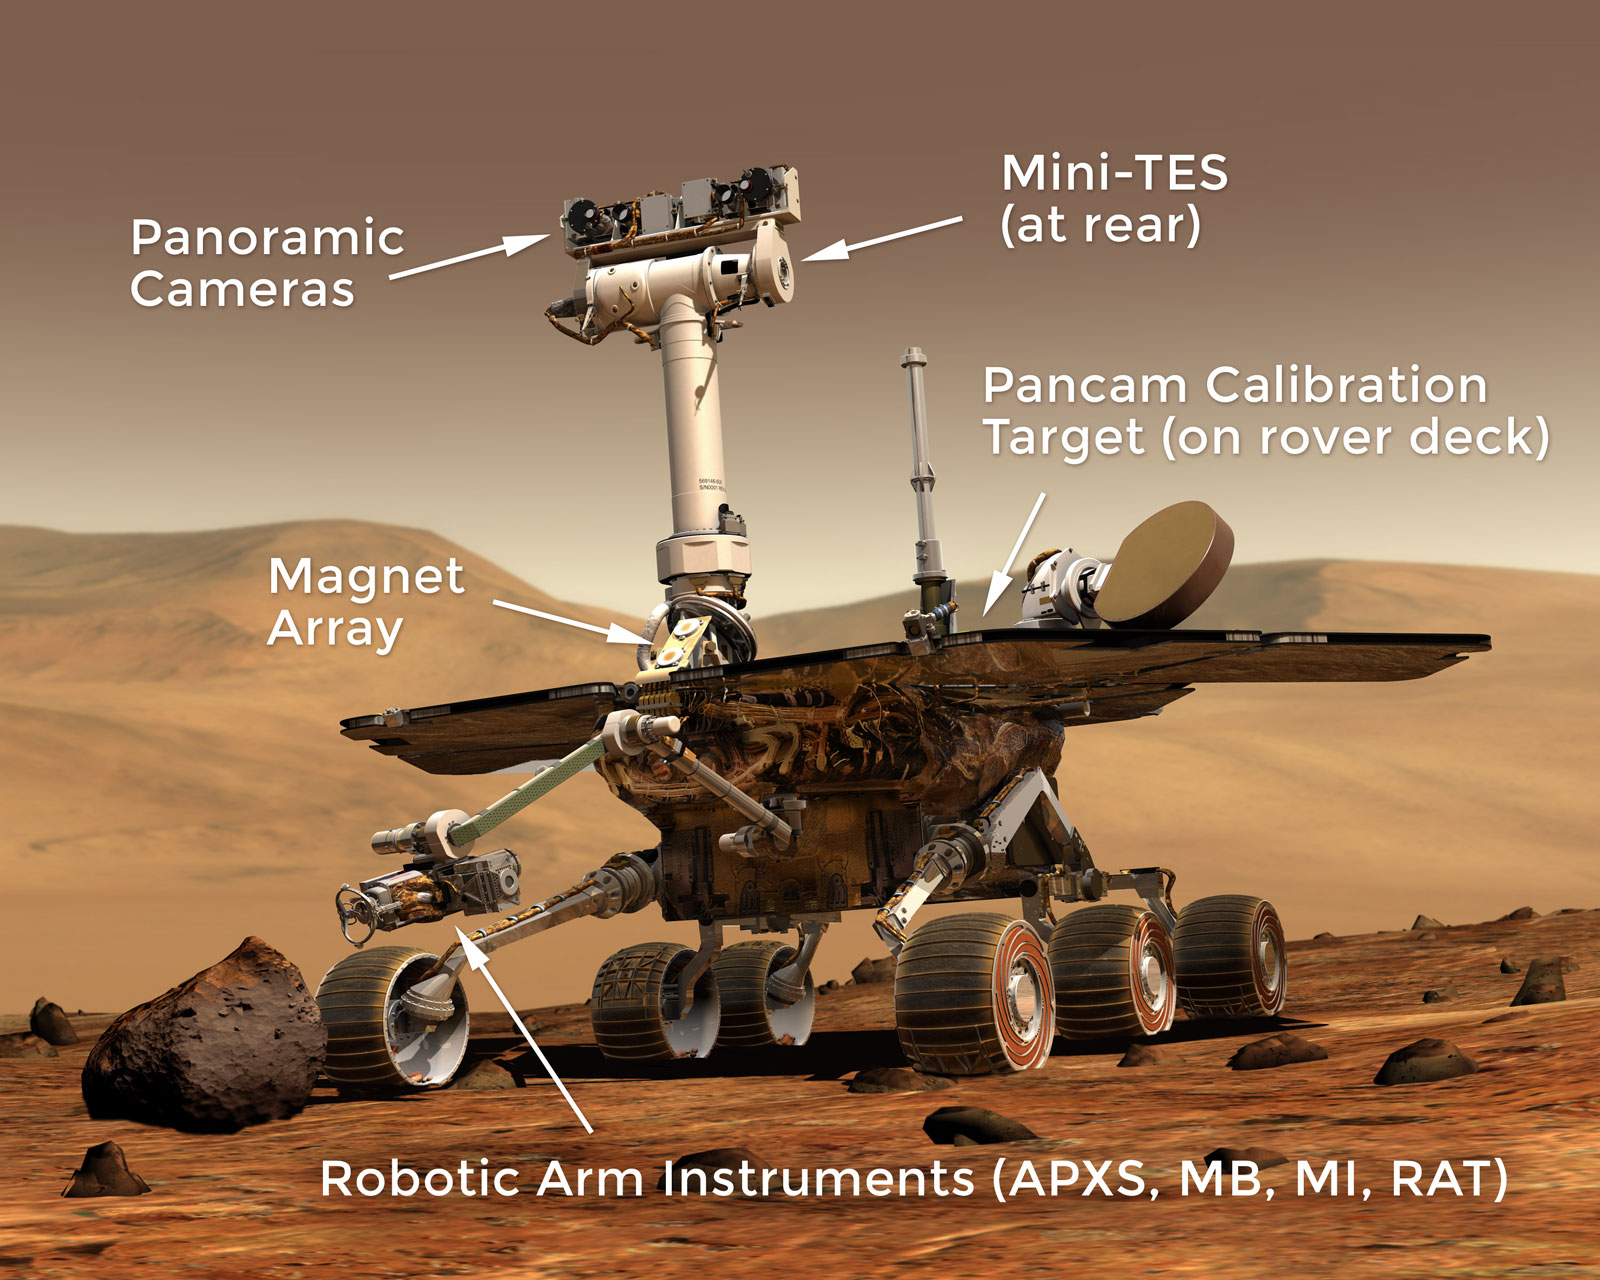 This illustration of a Mars rover on Mars shows the locations of various instruments.